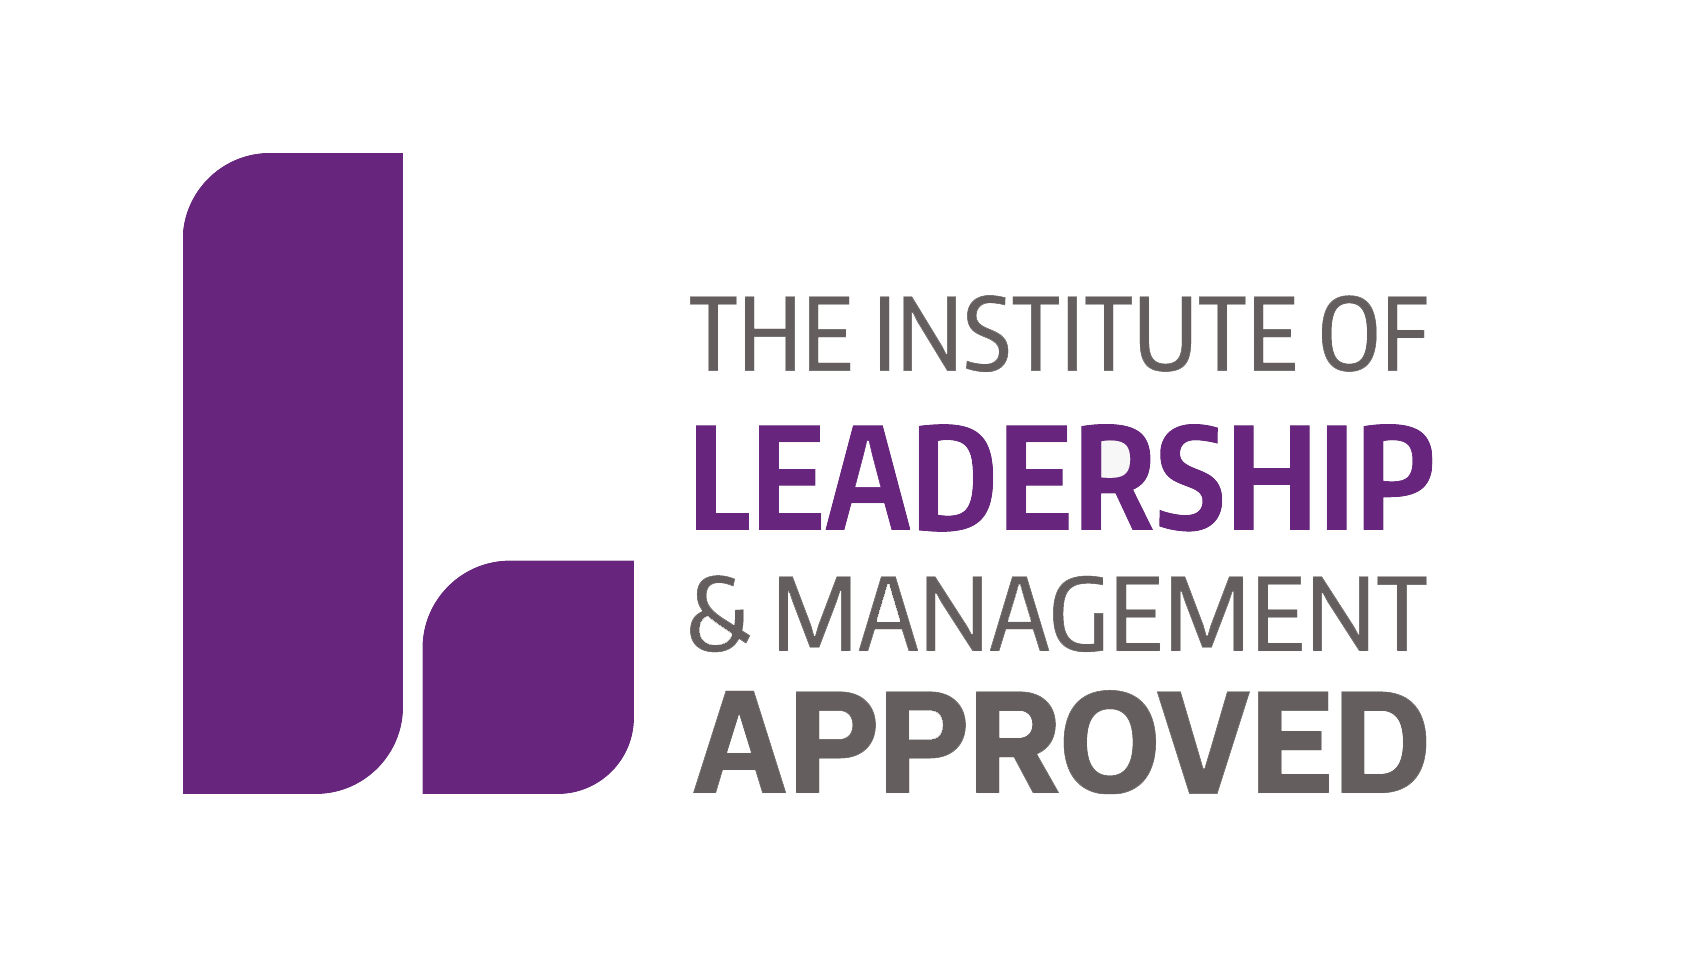 Institute of Leadership & Management Approved & Management Approved